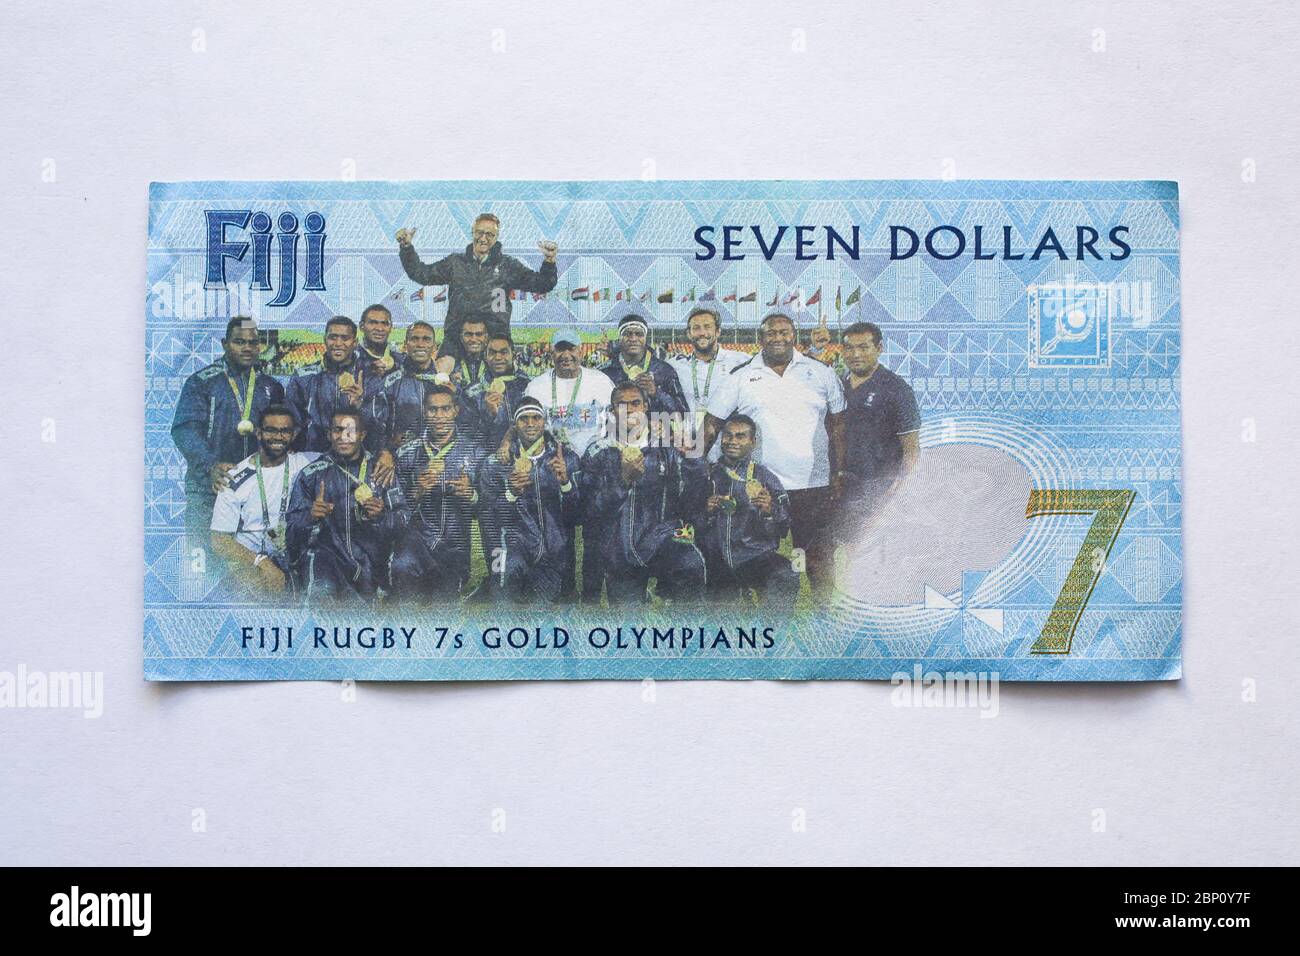 Fijian 7 dollar banknote commemorating Rugby 7 Gold medal win at the Rio 2016 Summer Olympics, Fiji, South Pacific. Stock Photo